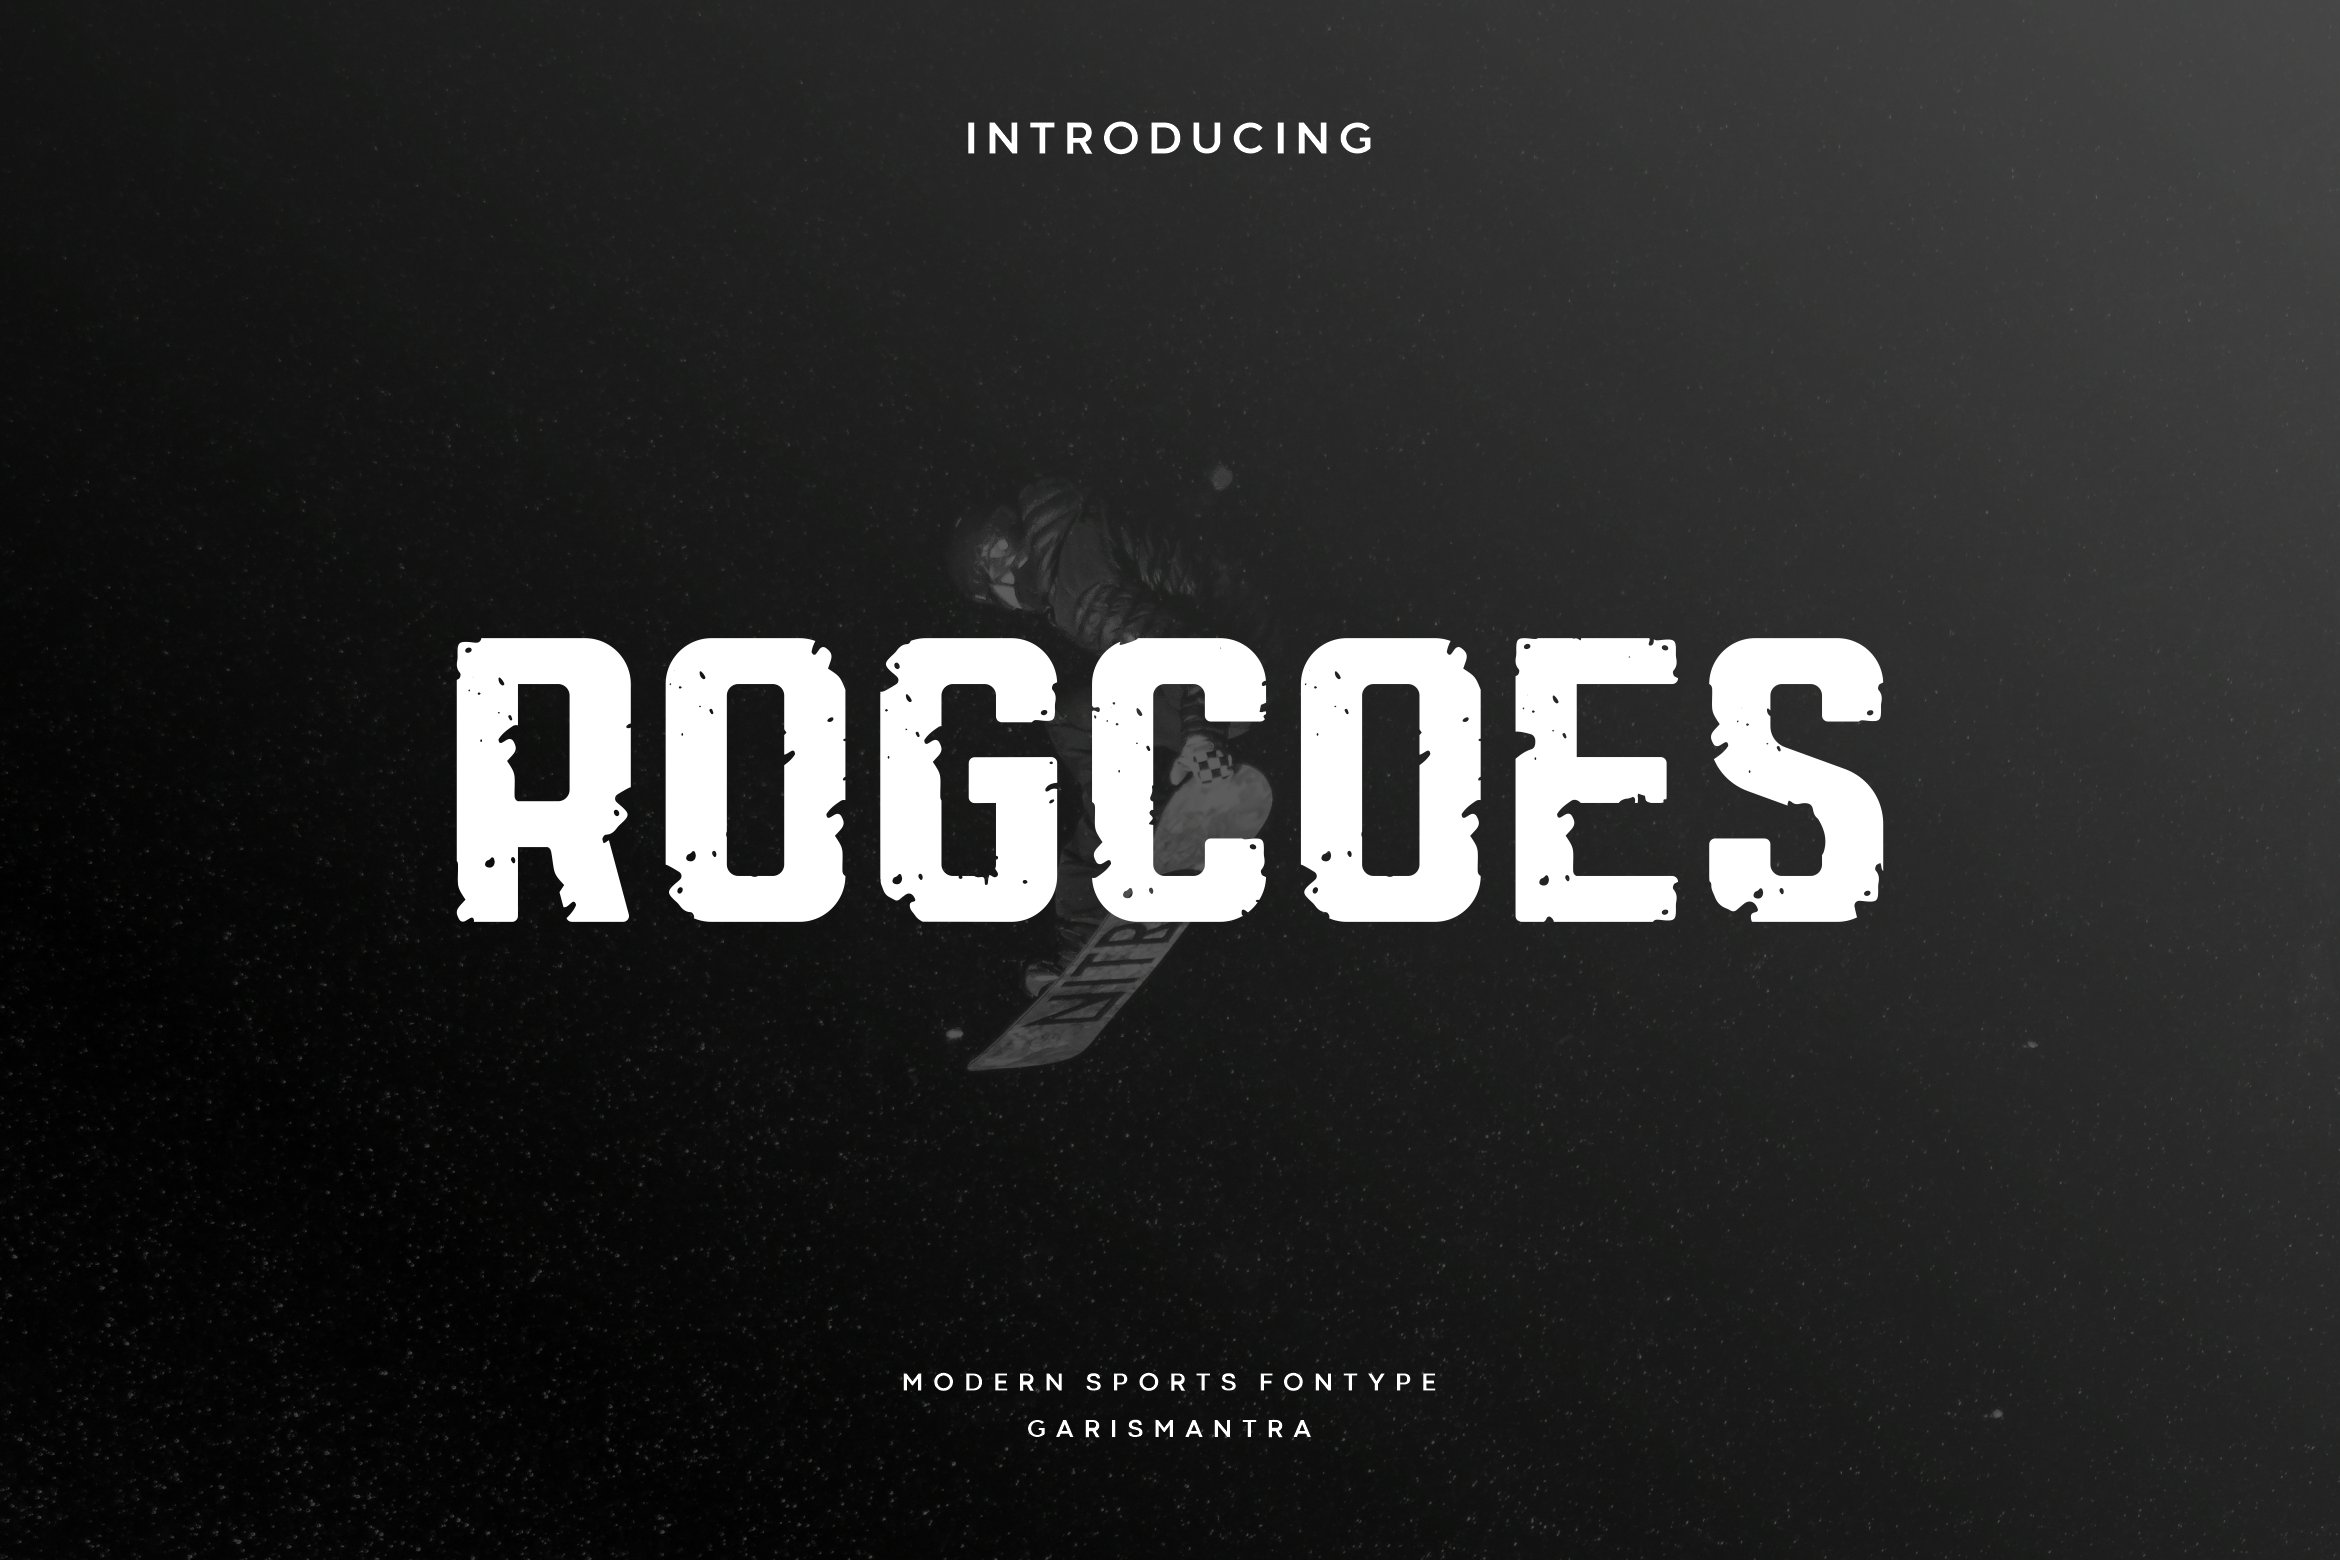 Rogcoes cover image.